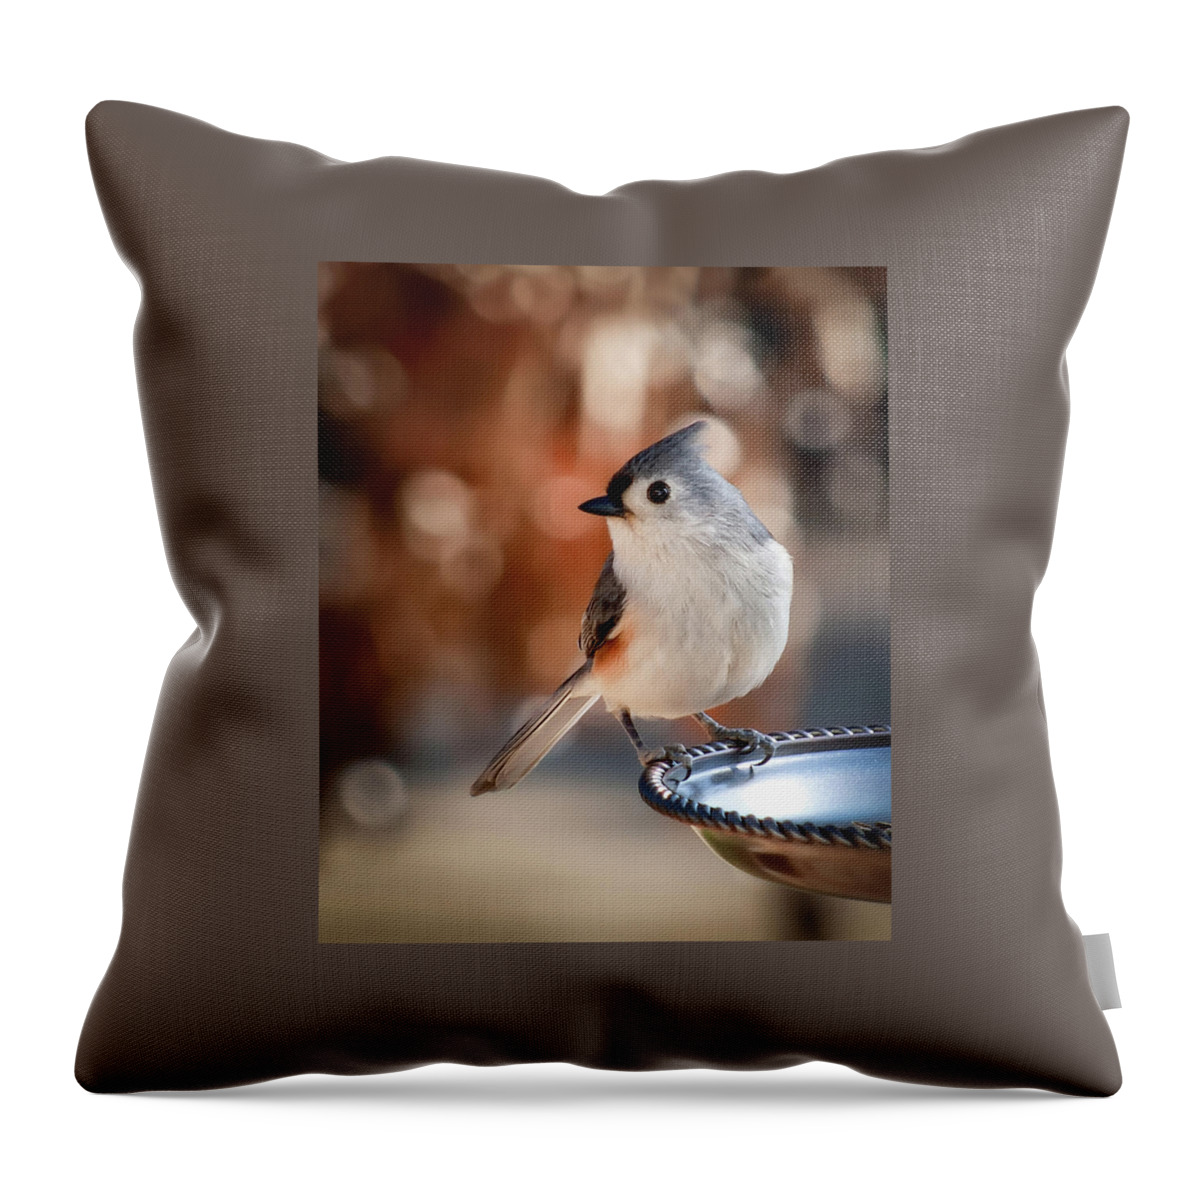 Titmouse Throw Pillow featuring the photograph Titmouse by James Barber